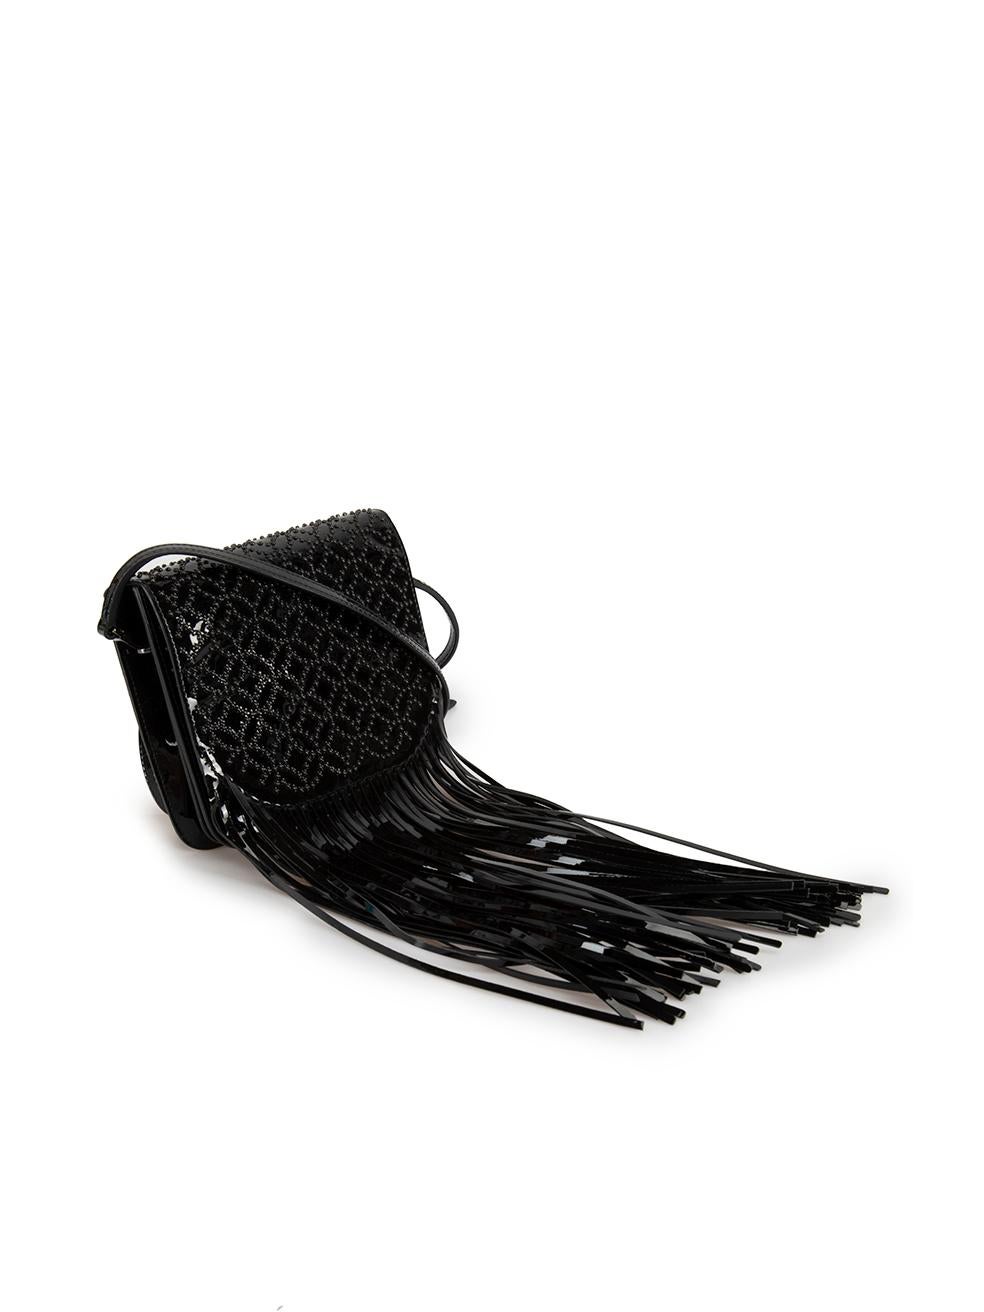 CONDITION is Very good. Hardly any visible wear to bag is evident on this used Ala√Øa designer resale item.

Details
Black
Patent leather
Mini crossbody bag
Detachable and adjustable strap
Flap with magnetic fastening
Fringe detail
Studded arabesque